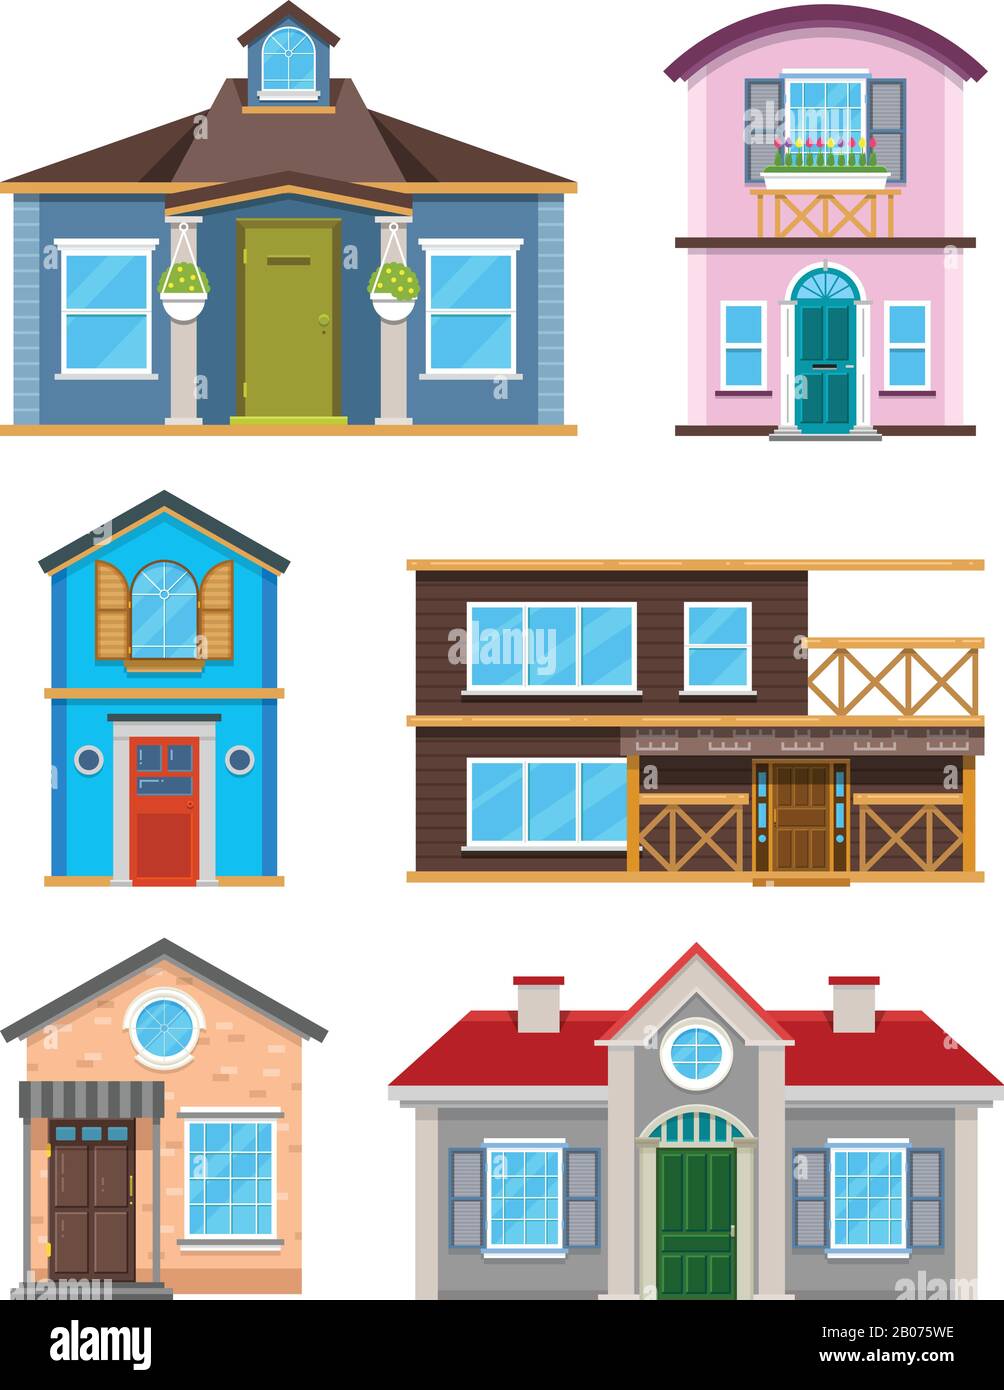 Modern residential building houses cartoon vector collection. Architecture home cottage and exterior residence color illustration Stock Vector